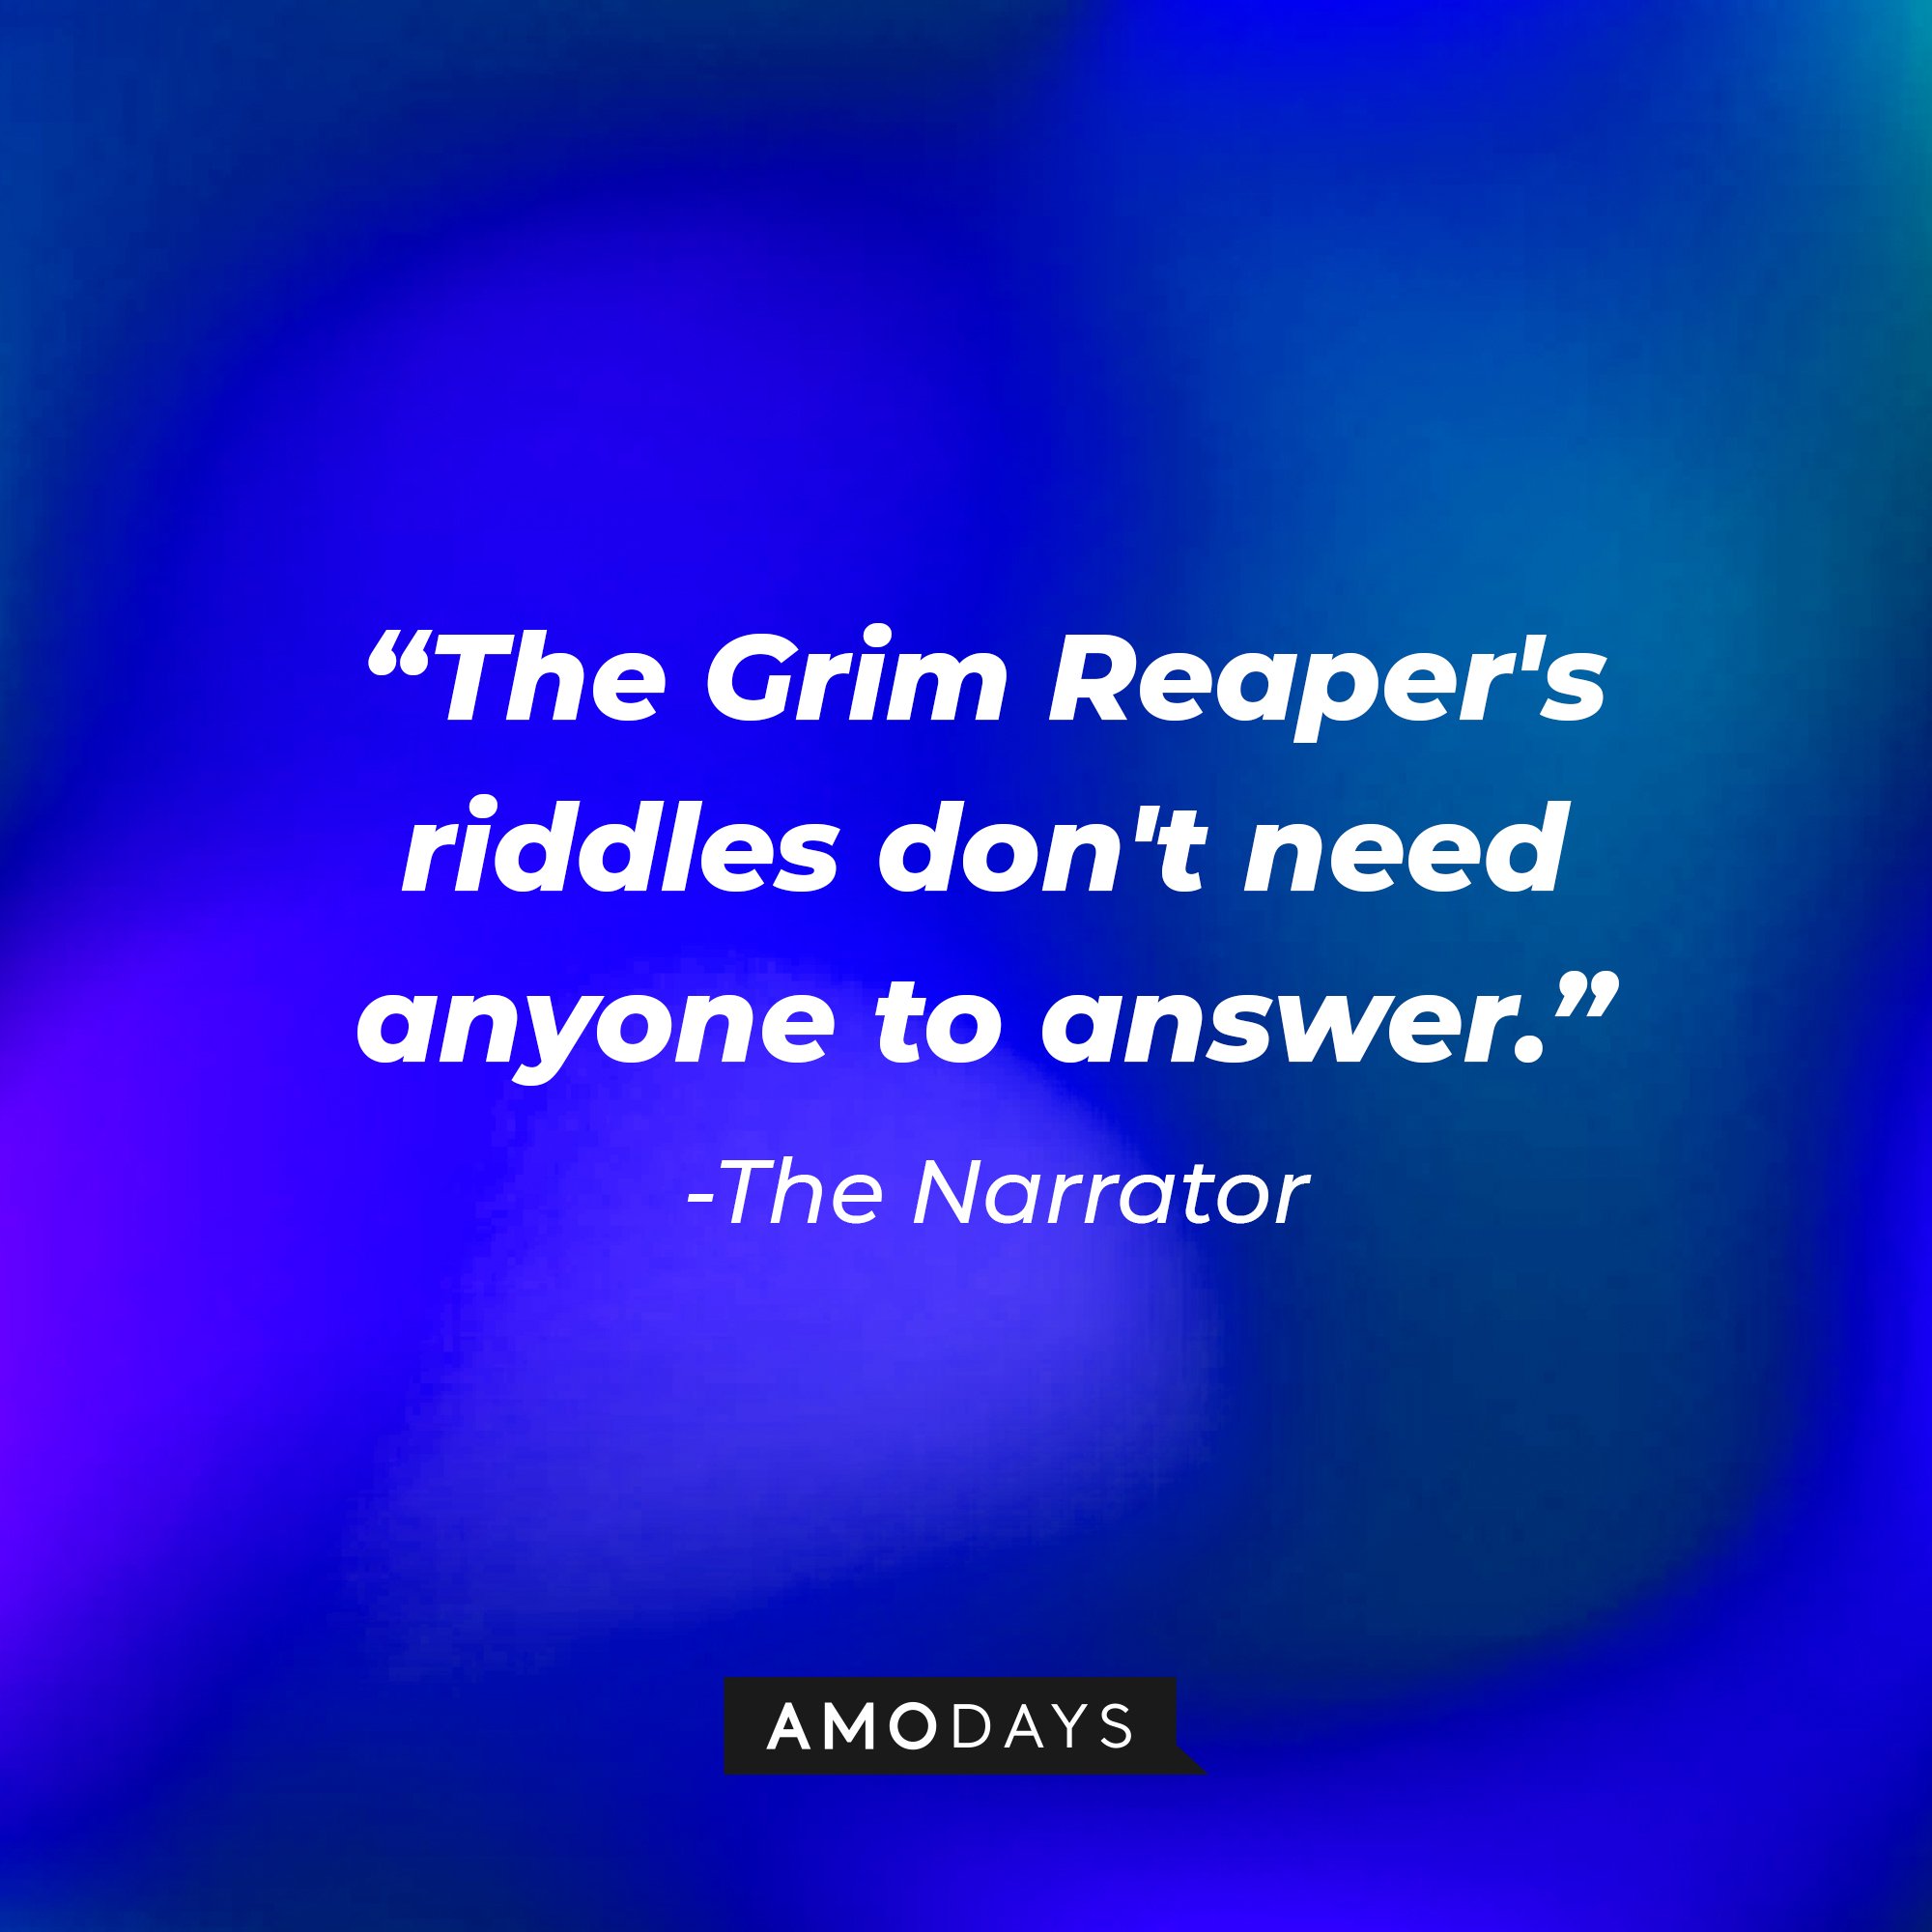 The Narrator’s quote: "The Grim Reaper's riddles don't need anyone to answer." | Image: AmoDays